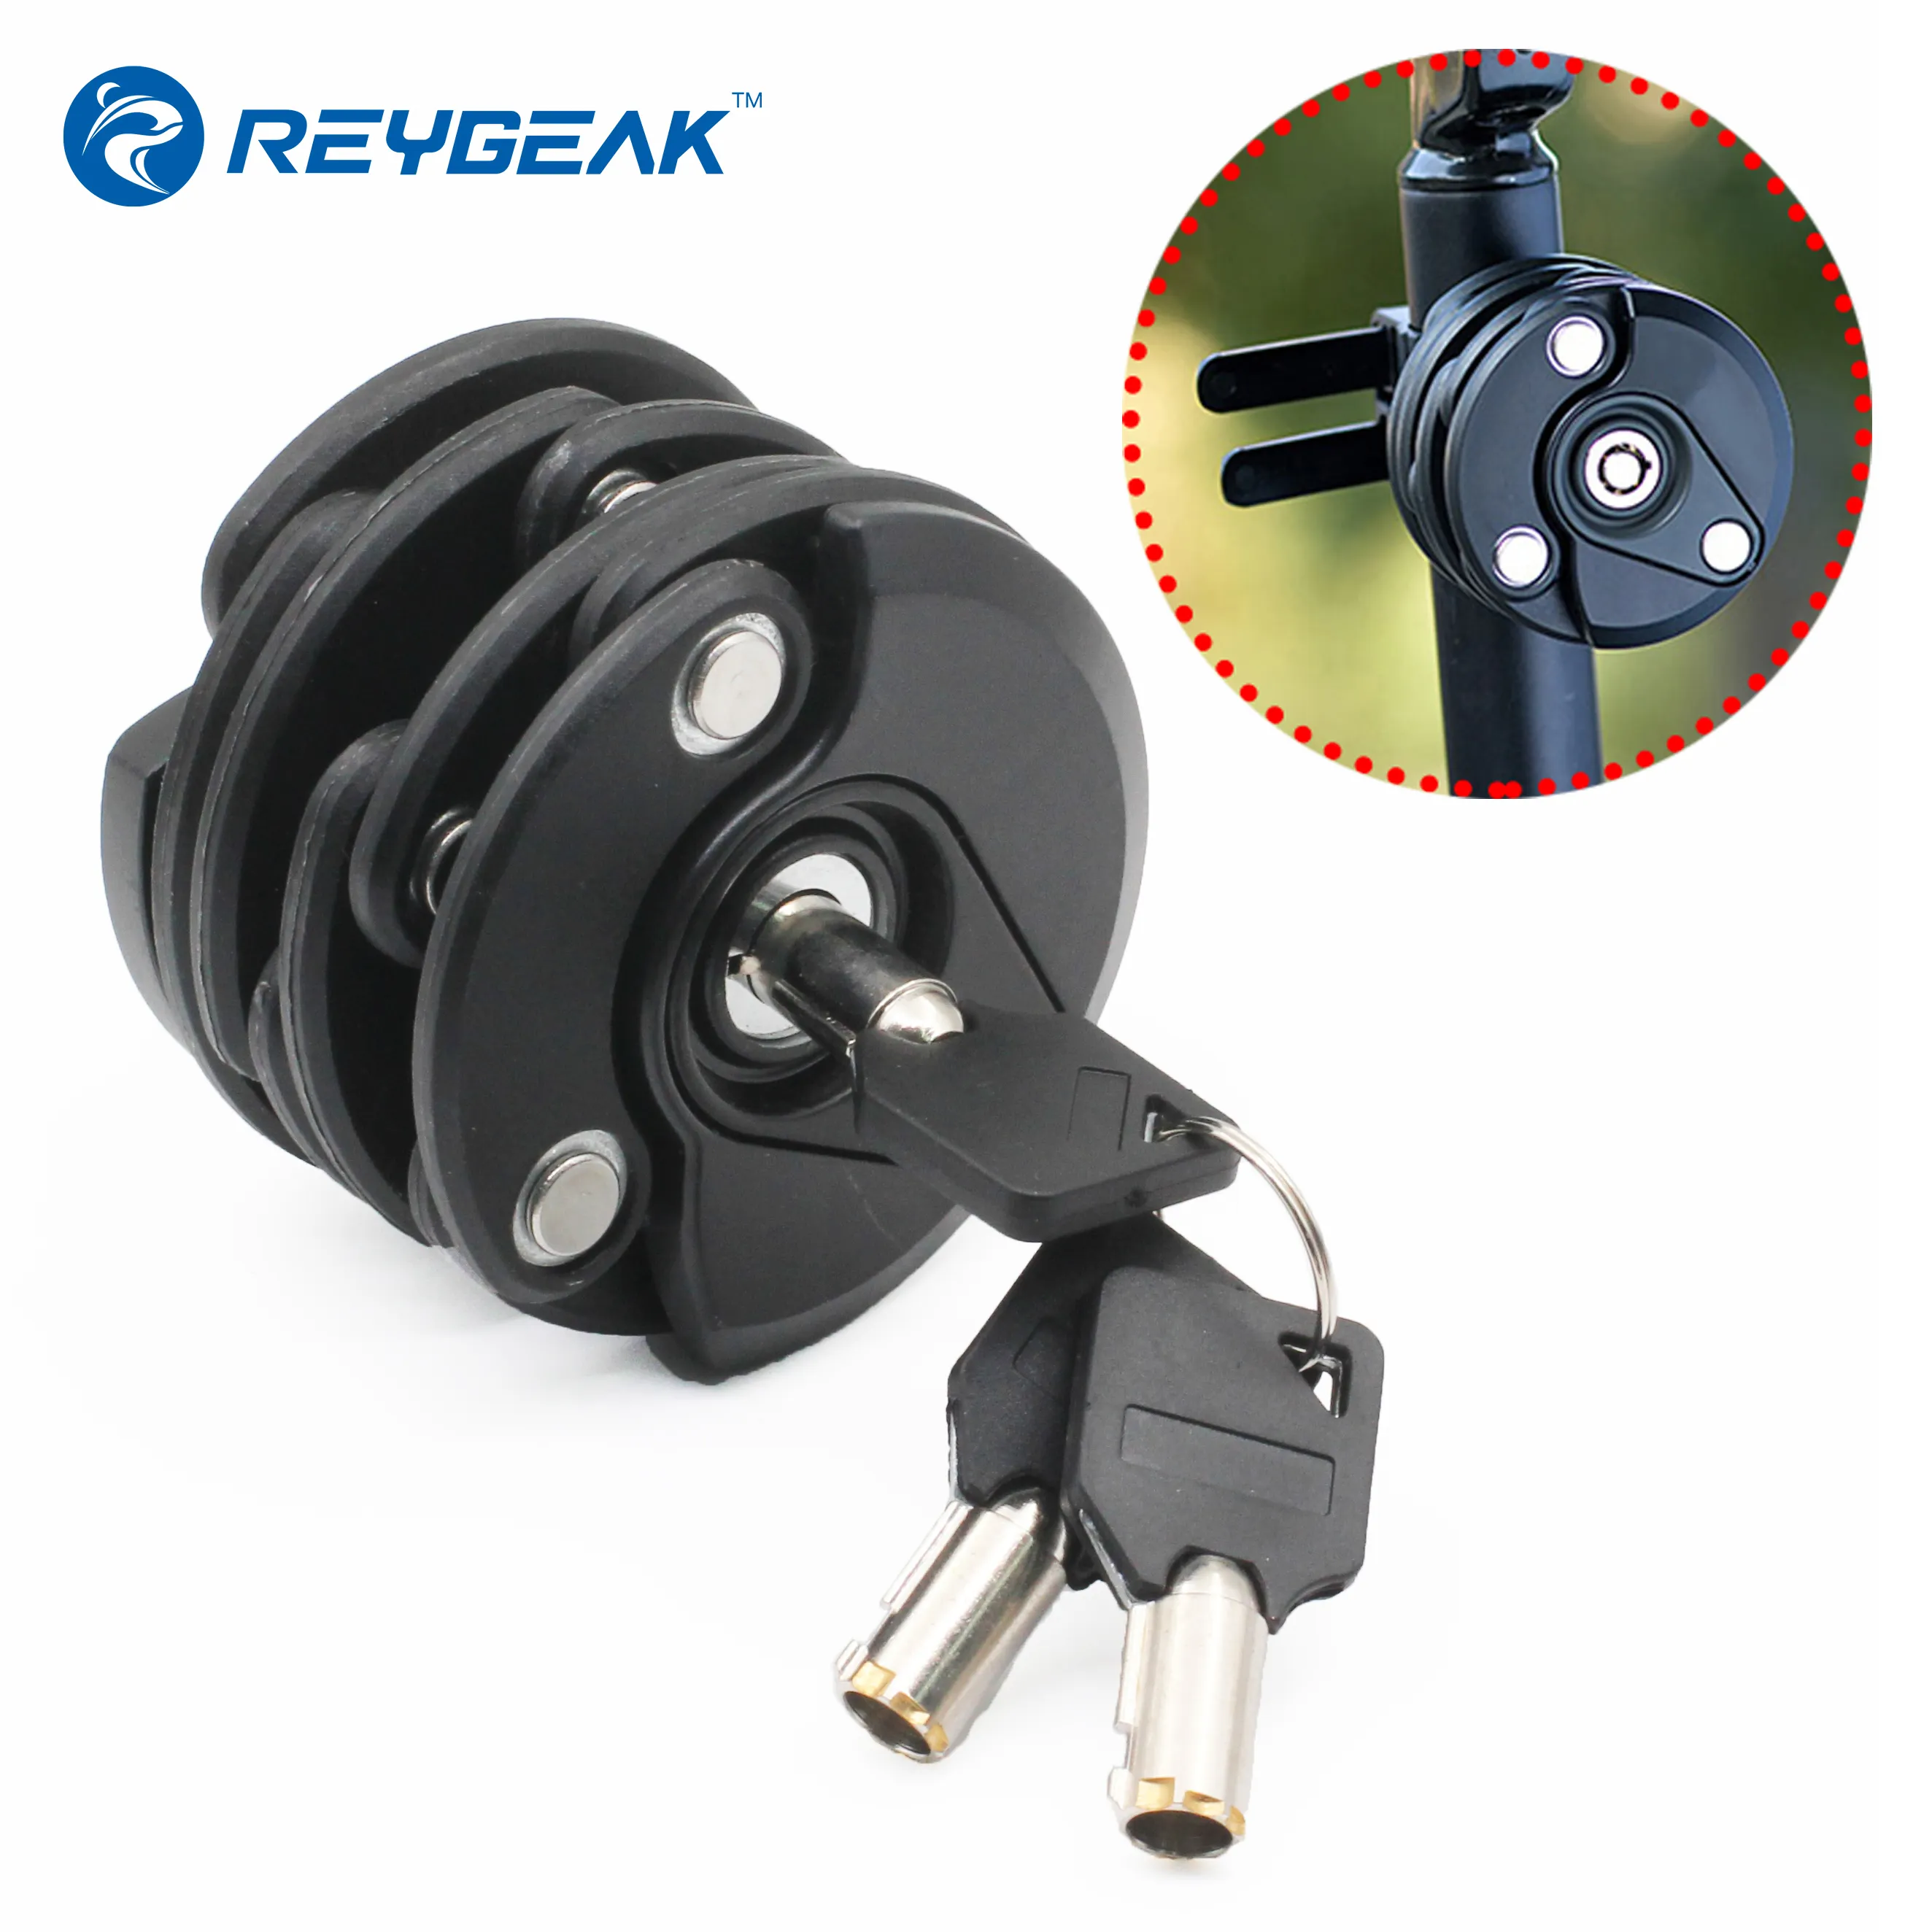 REYGEAK Bicycle Parts Cylinder Foldable Joint Lock Anti-Theft Chain Lock Bicycle Hamburg Padlock Easy To Store Universal